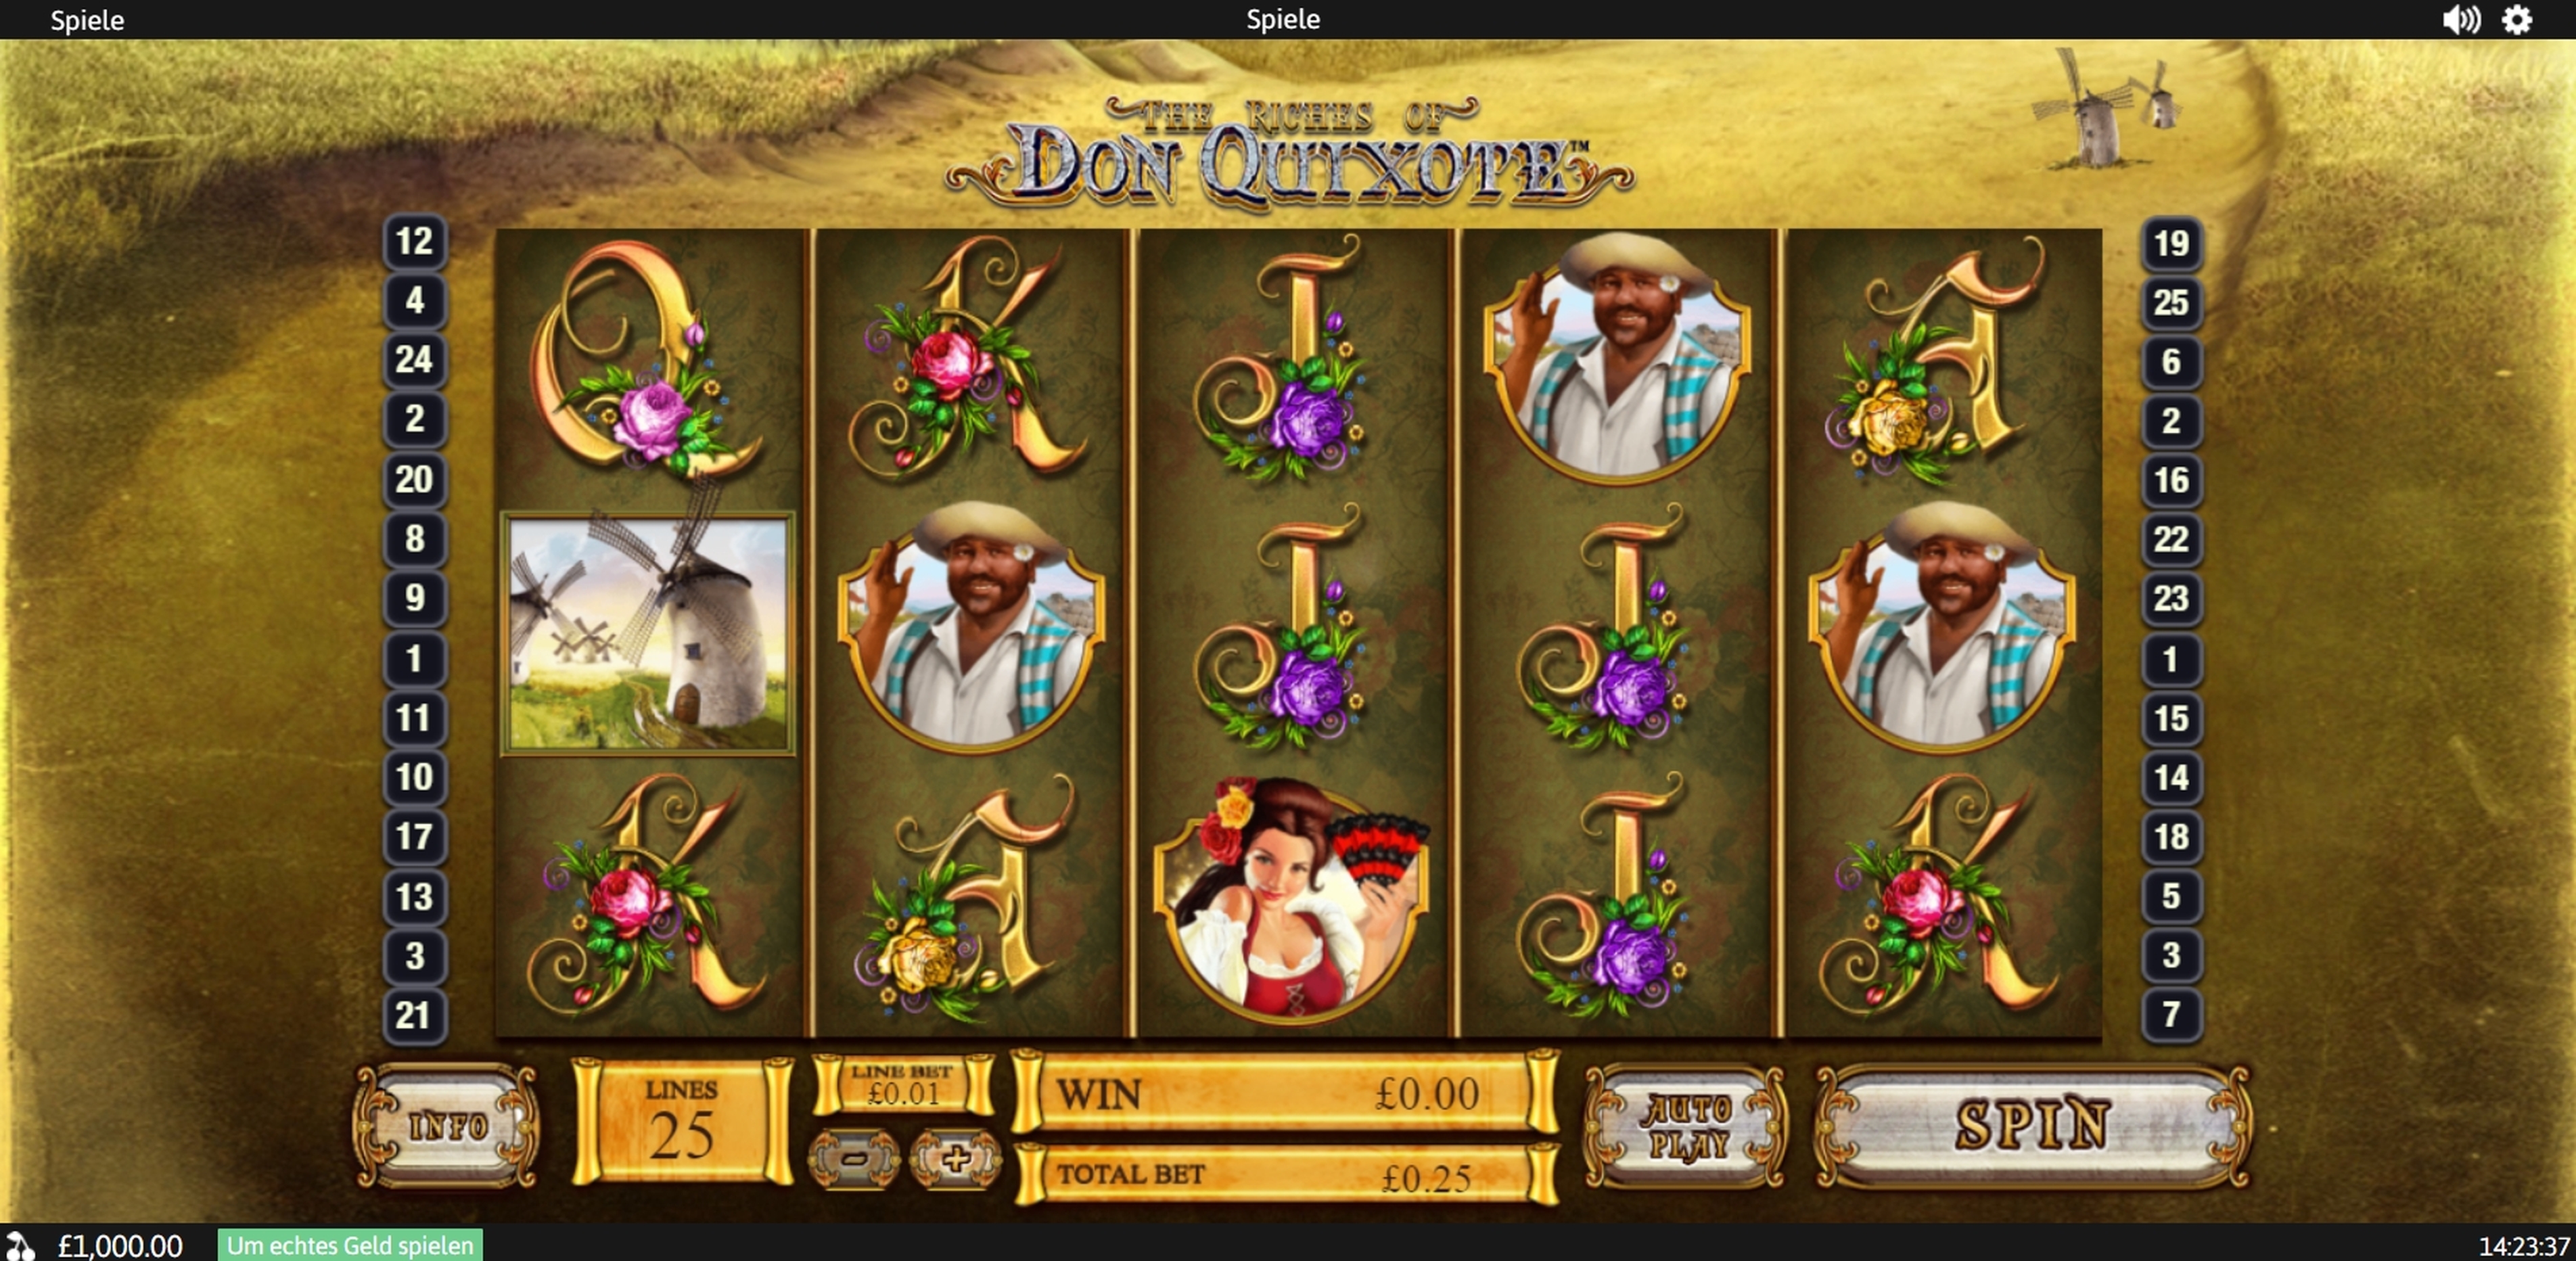 Reels in The Riches of Don Quixote Slot Game by Playtech